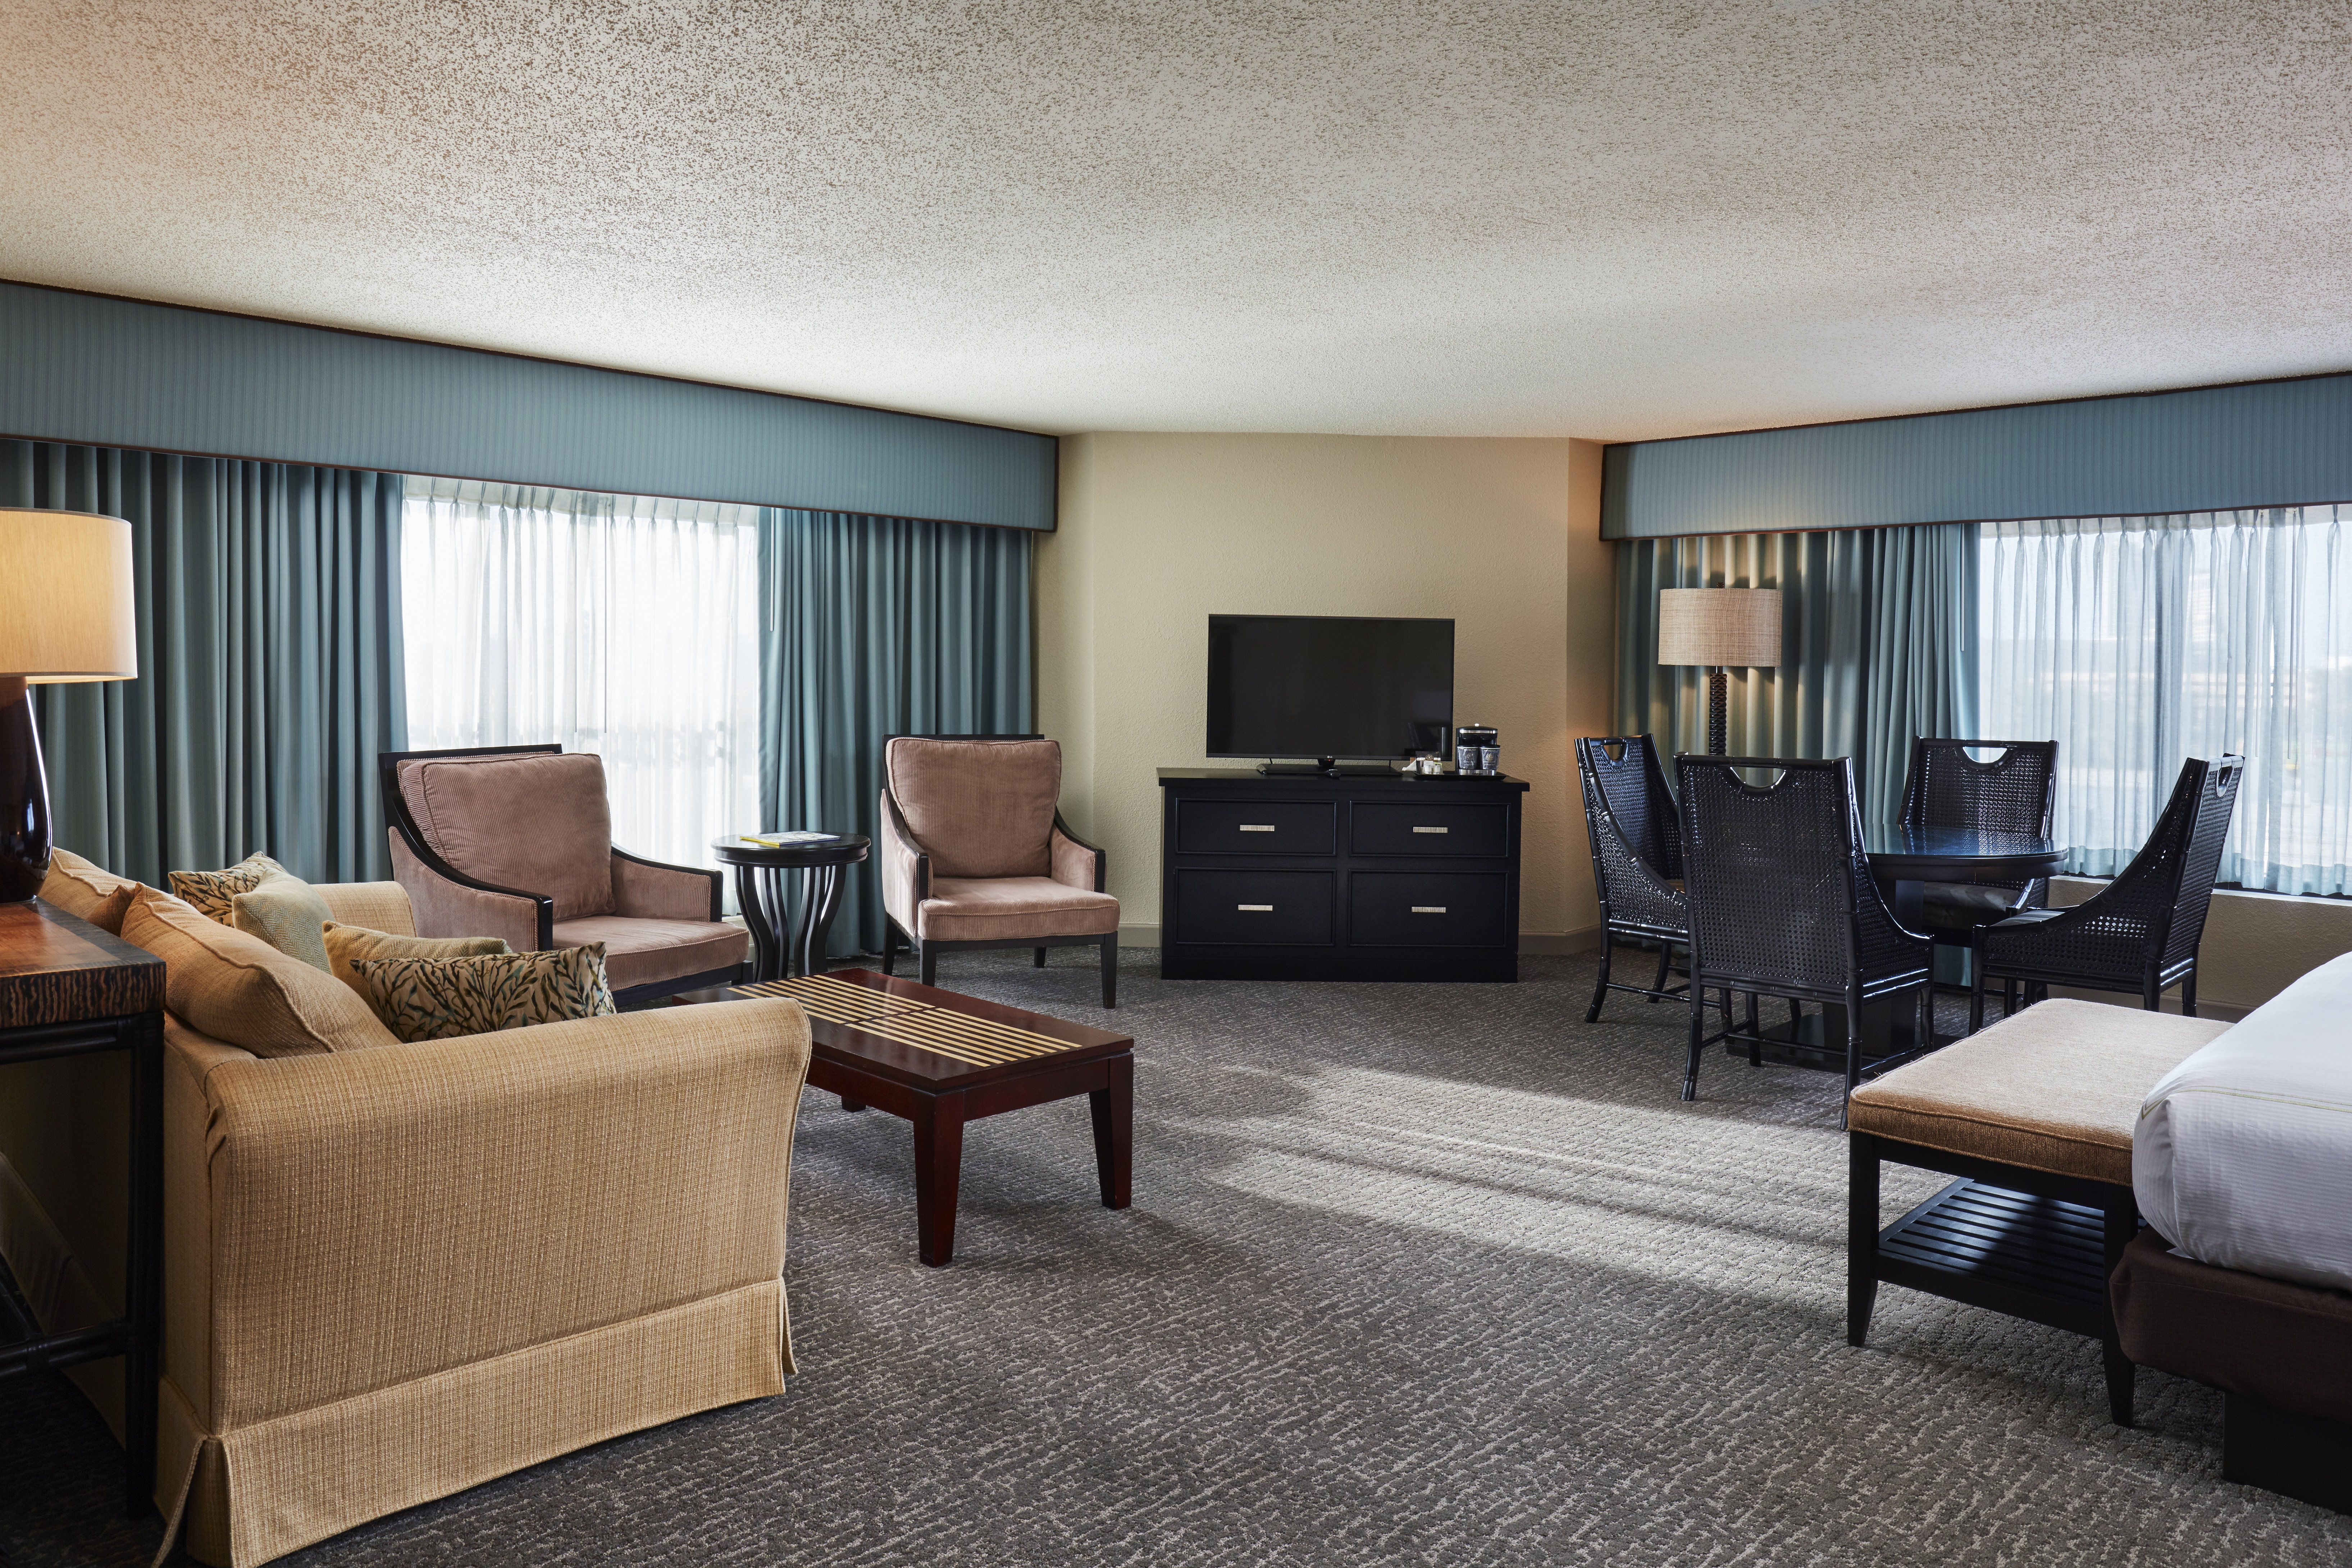 Junior Suite with Bed, Lounge Seating, Table and Television